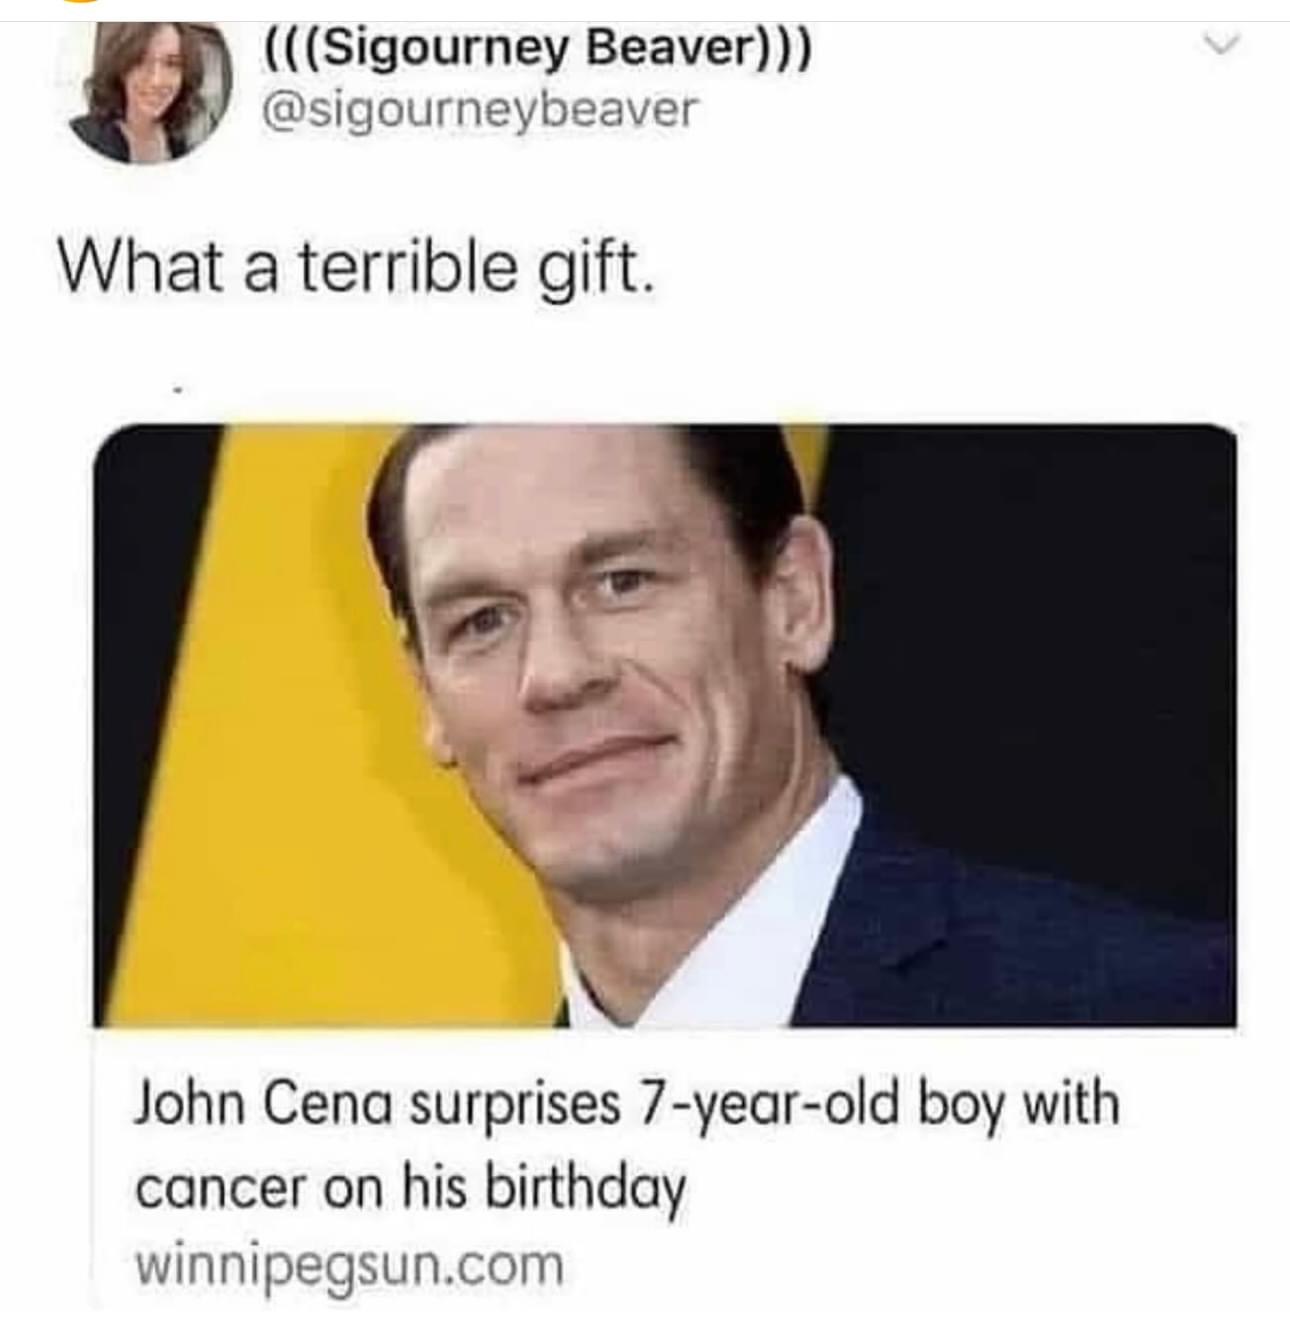 john cena surprises 7 year old boy with cancer for his birthday, what a terrible gift